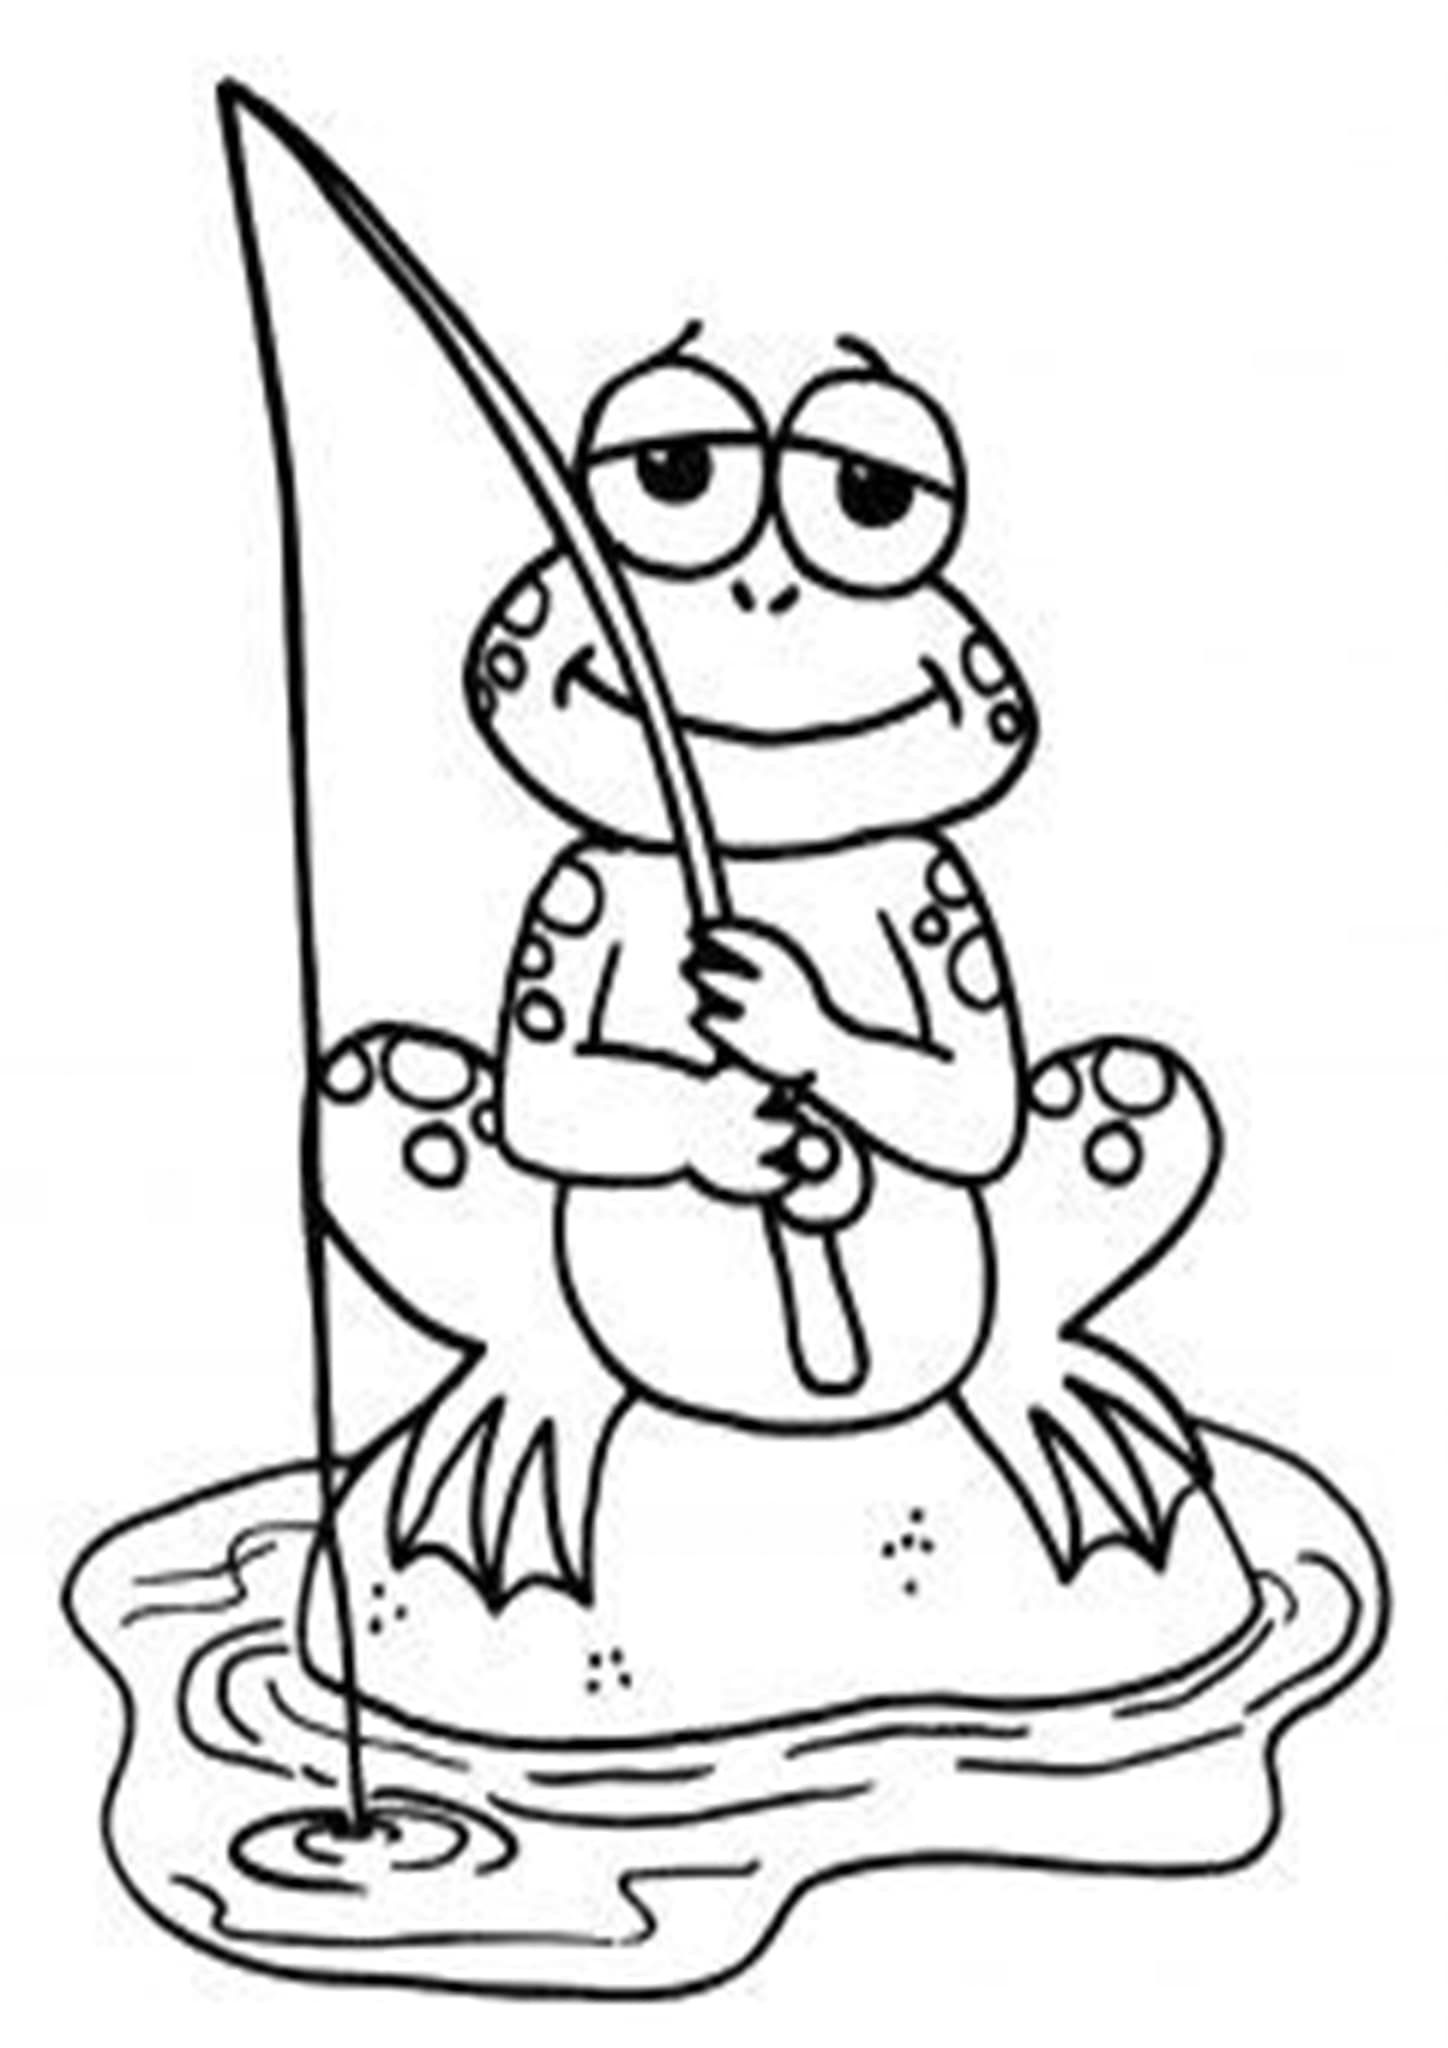 Download Free & Easy To Print Frog Coloring Pages - Tulamama